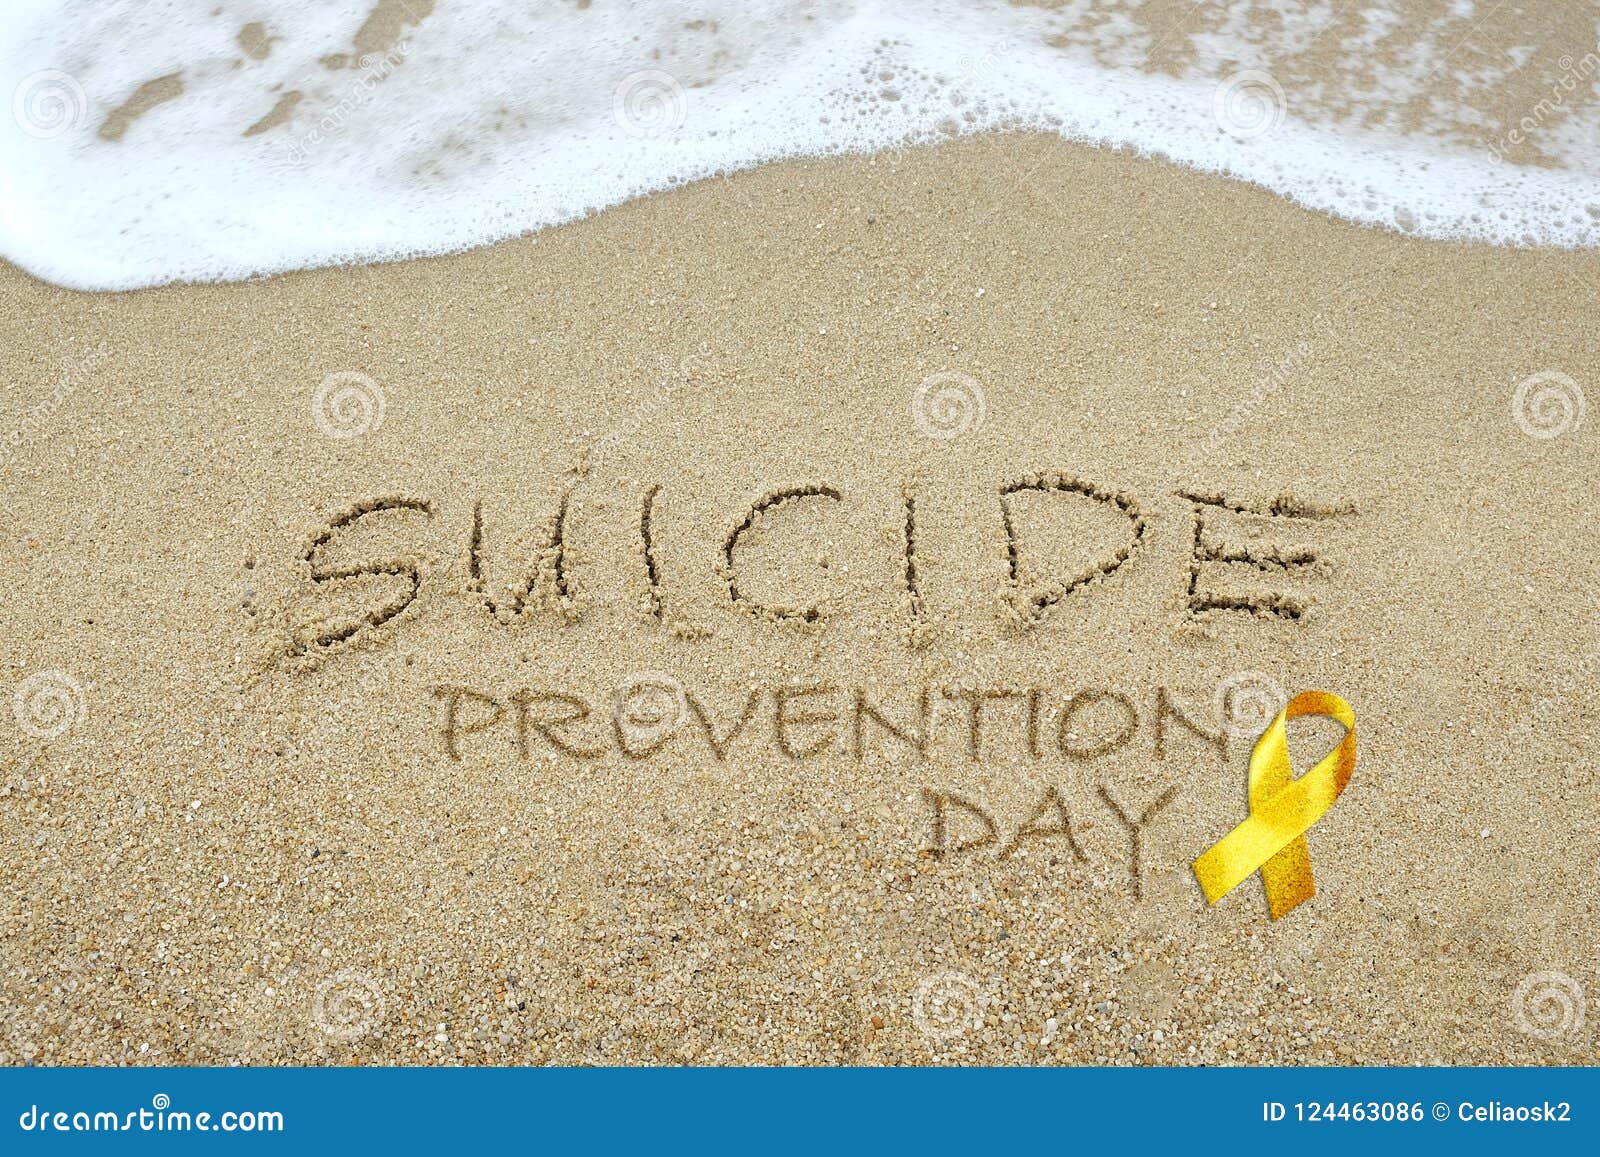 suicide prevention day concept